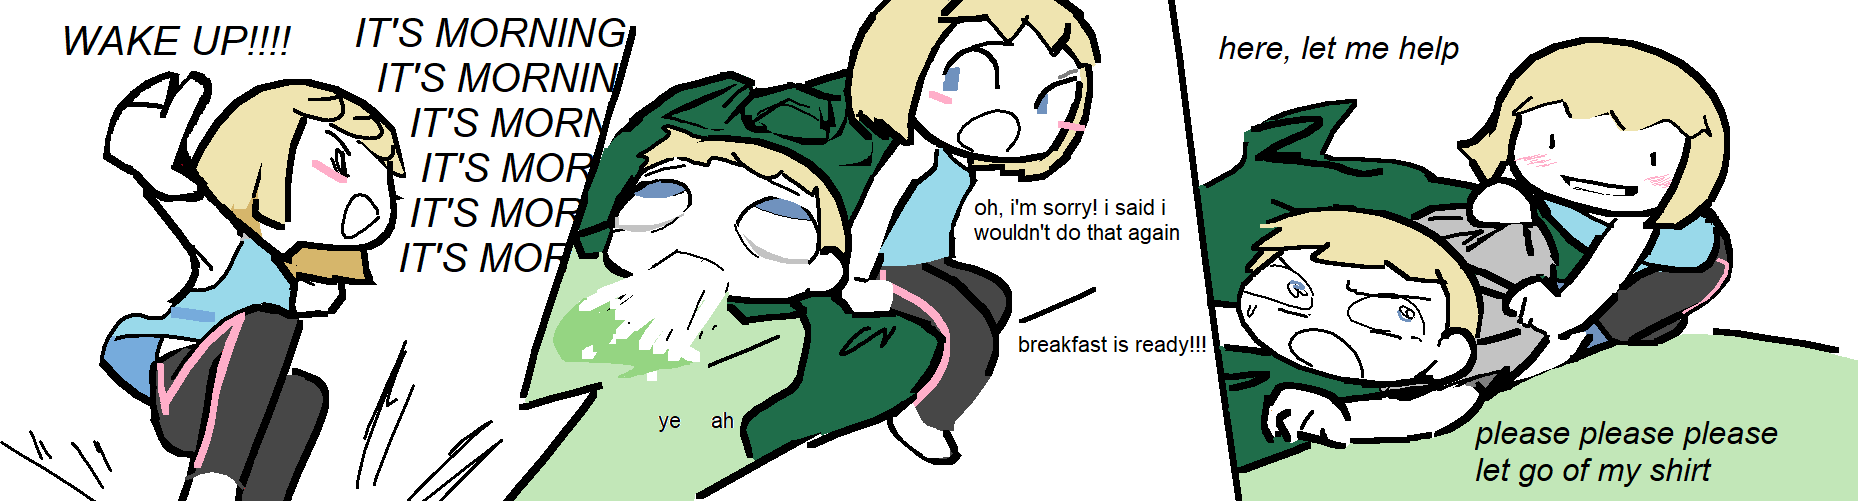 Imouto comic part lost count